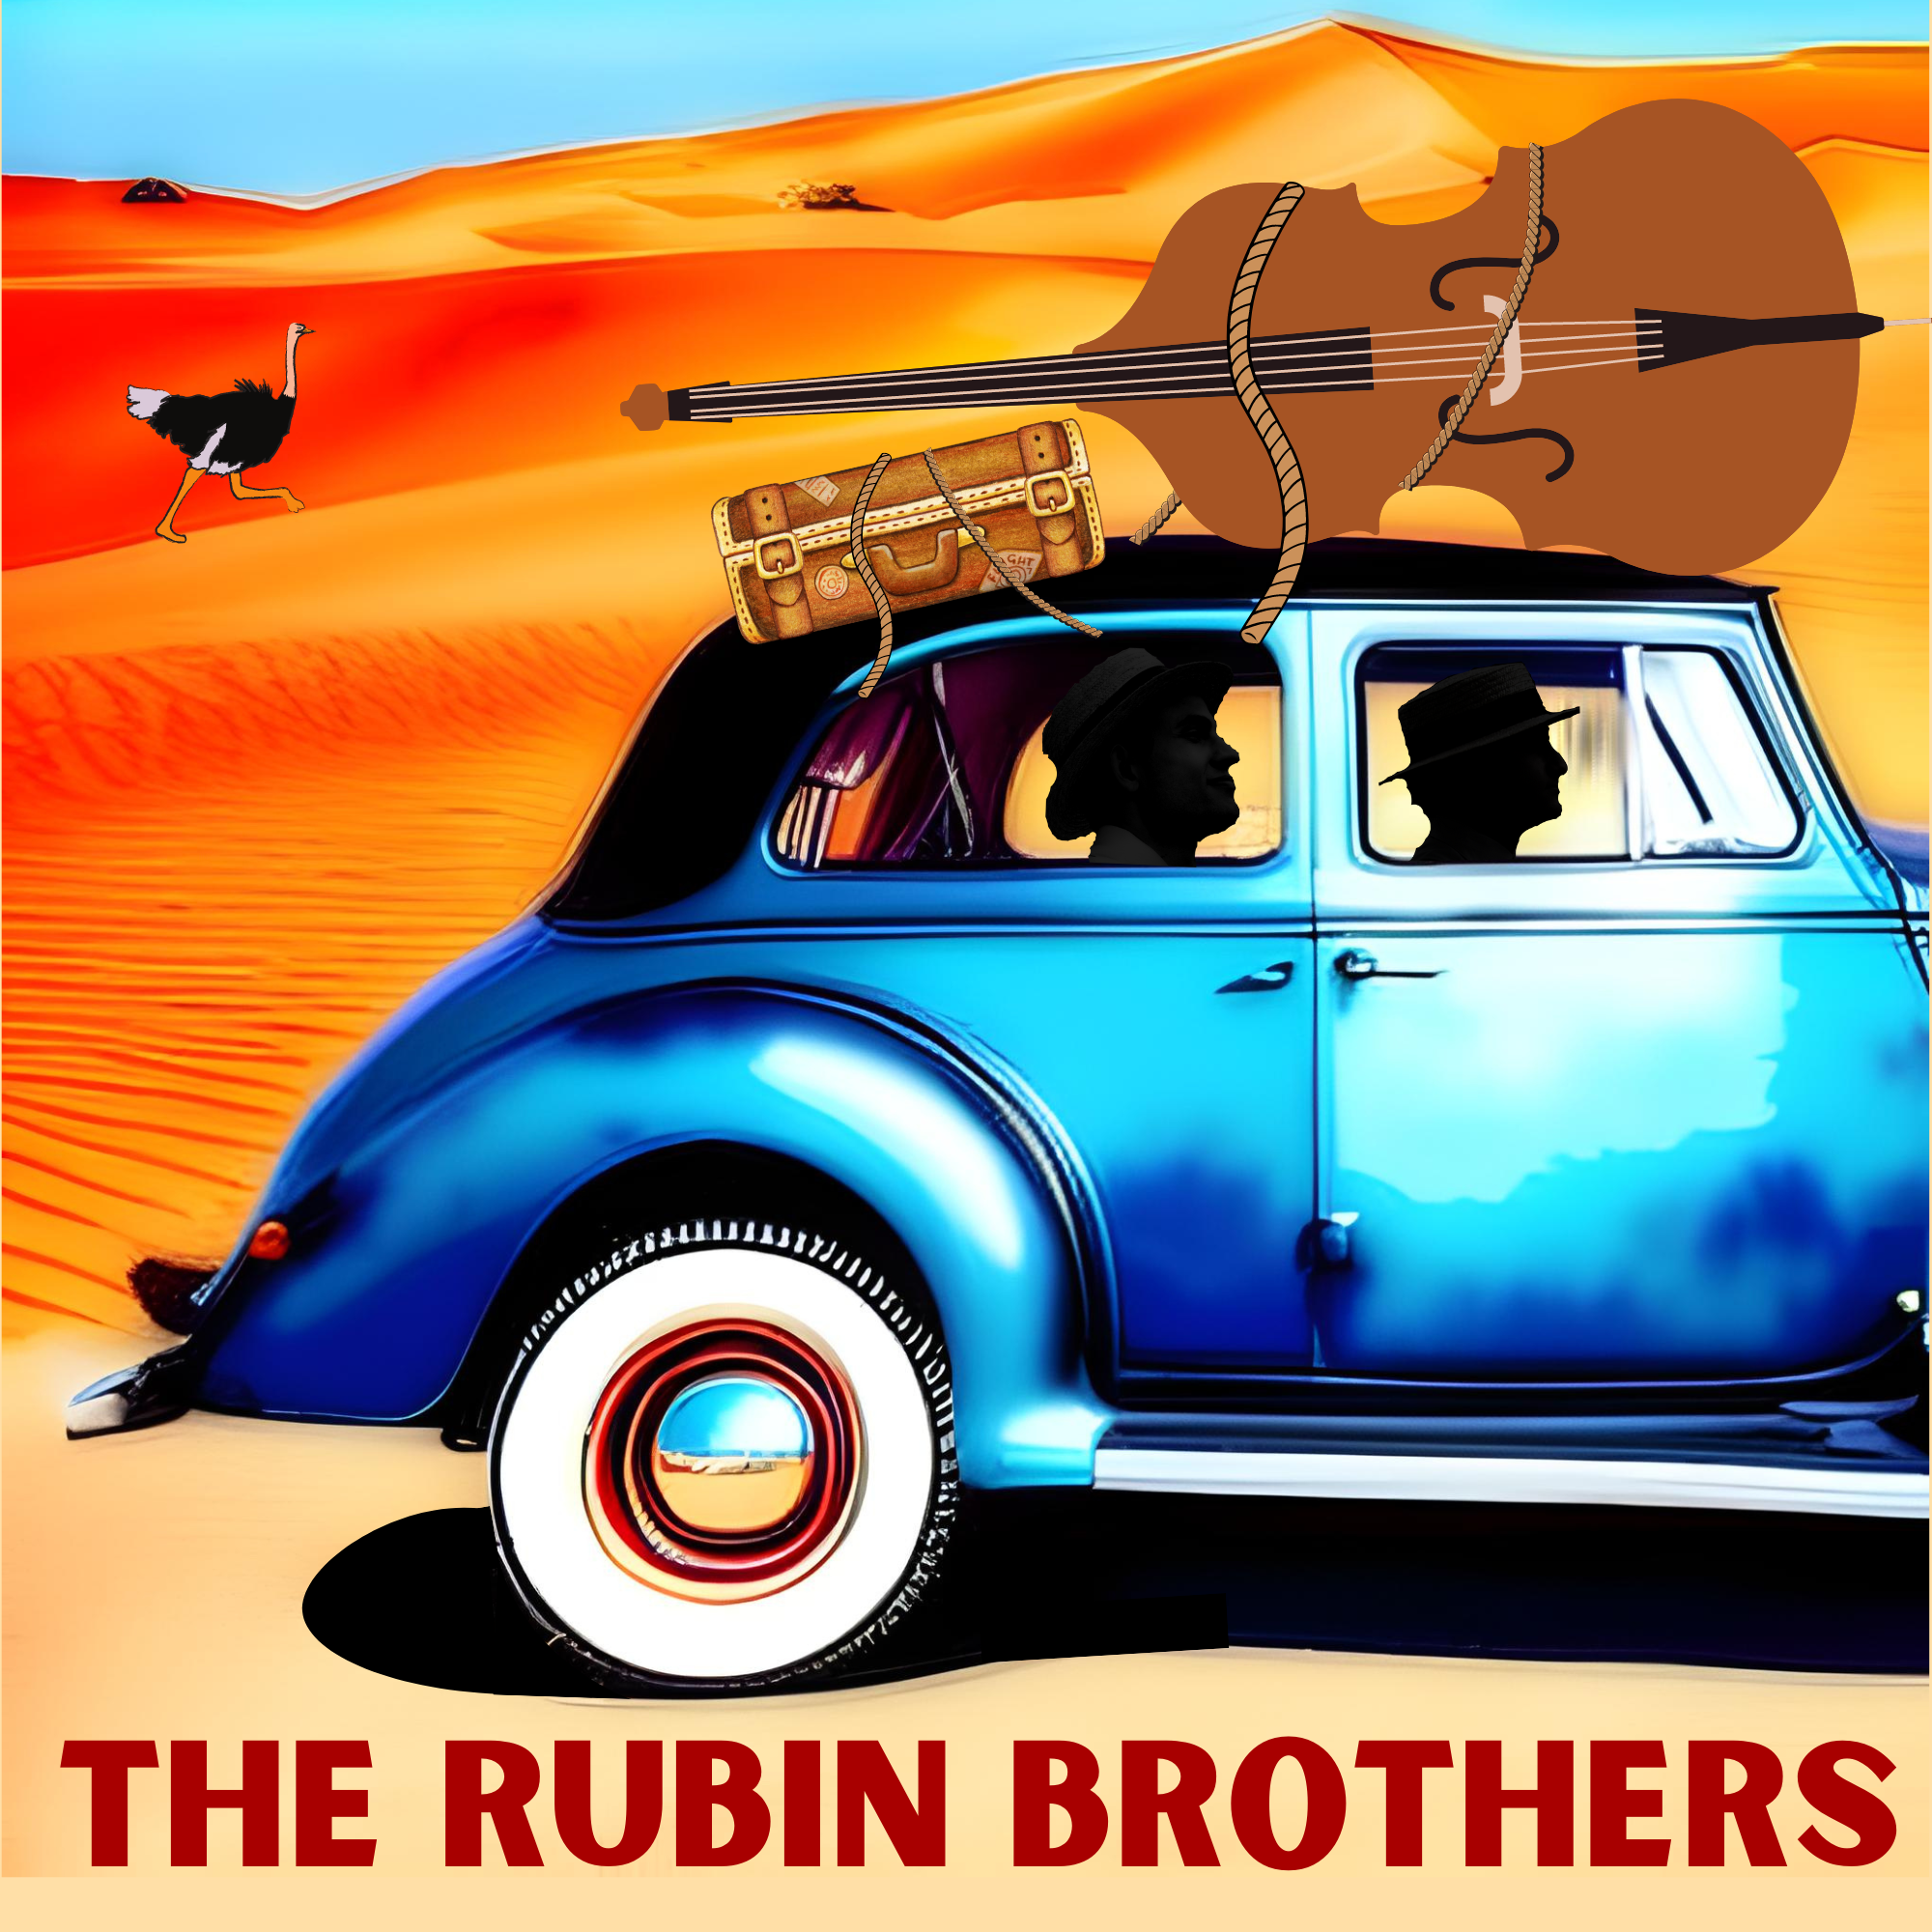 Rubin Brothers EP Art, Rubin Brothers in San Diego, blue car in the desert with a bass on top and an ostrich running behind, swing music vaudeville vintage art album cover